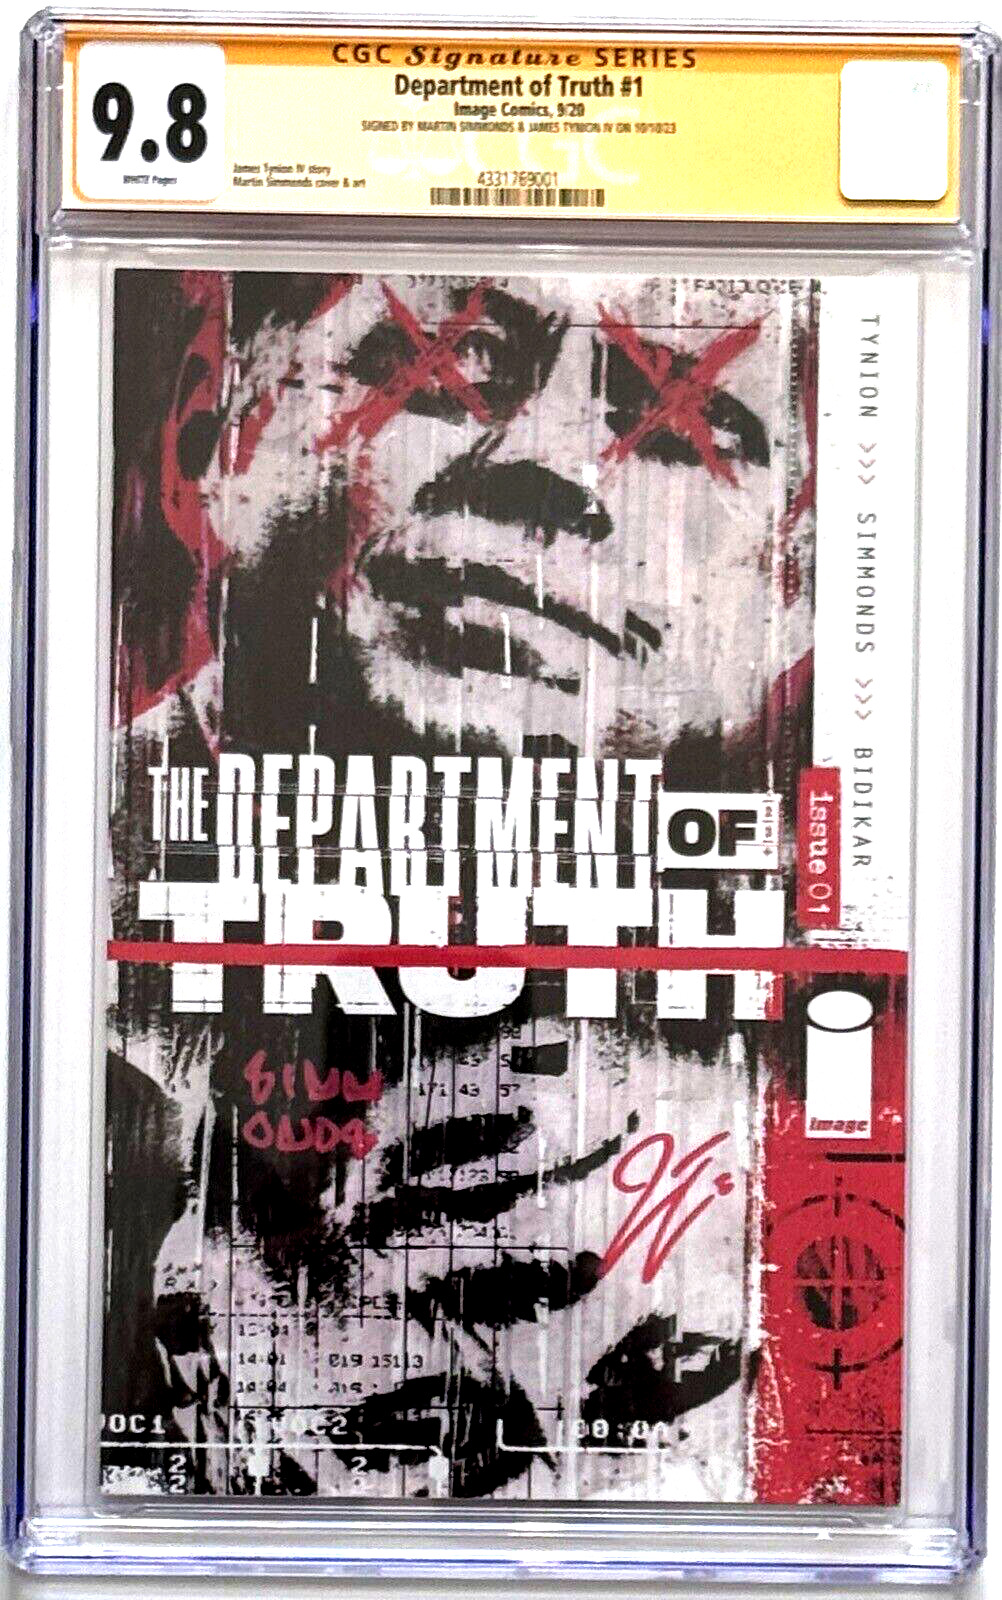 Department Truth Signed CGC 9.8 Dual Signed By Tynion IV & Simmonds